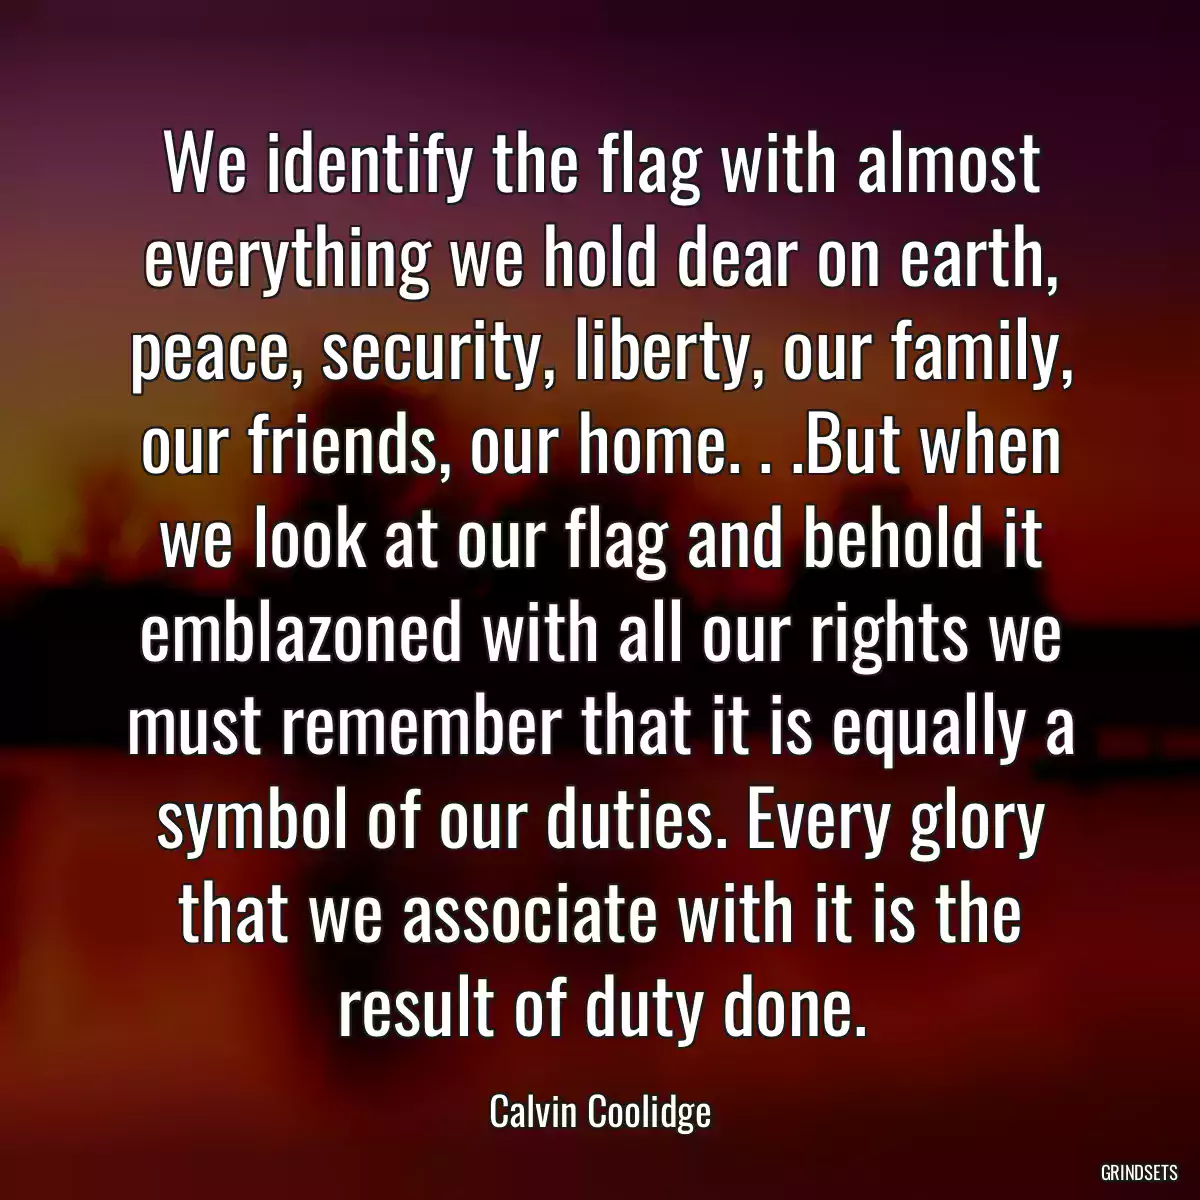 We identify the flag with almost everything we hold dear on earth, peace, security, liberty, our family, our friends, our home. . .But when we look at our flag and behold it emblazoned with all our rights we must remember that it is equally a symbol of our duties. Every glory that we associate with it is the result of duty done.